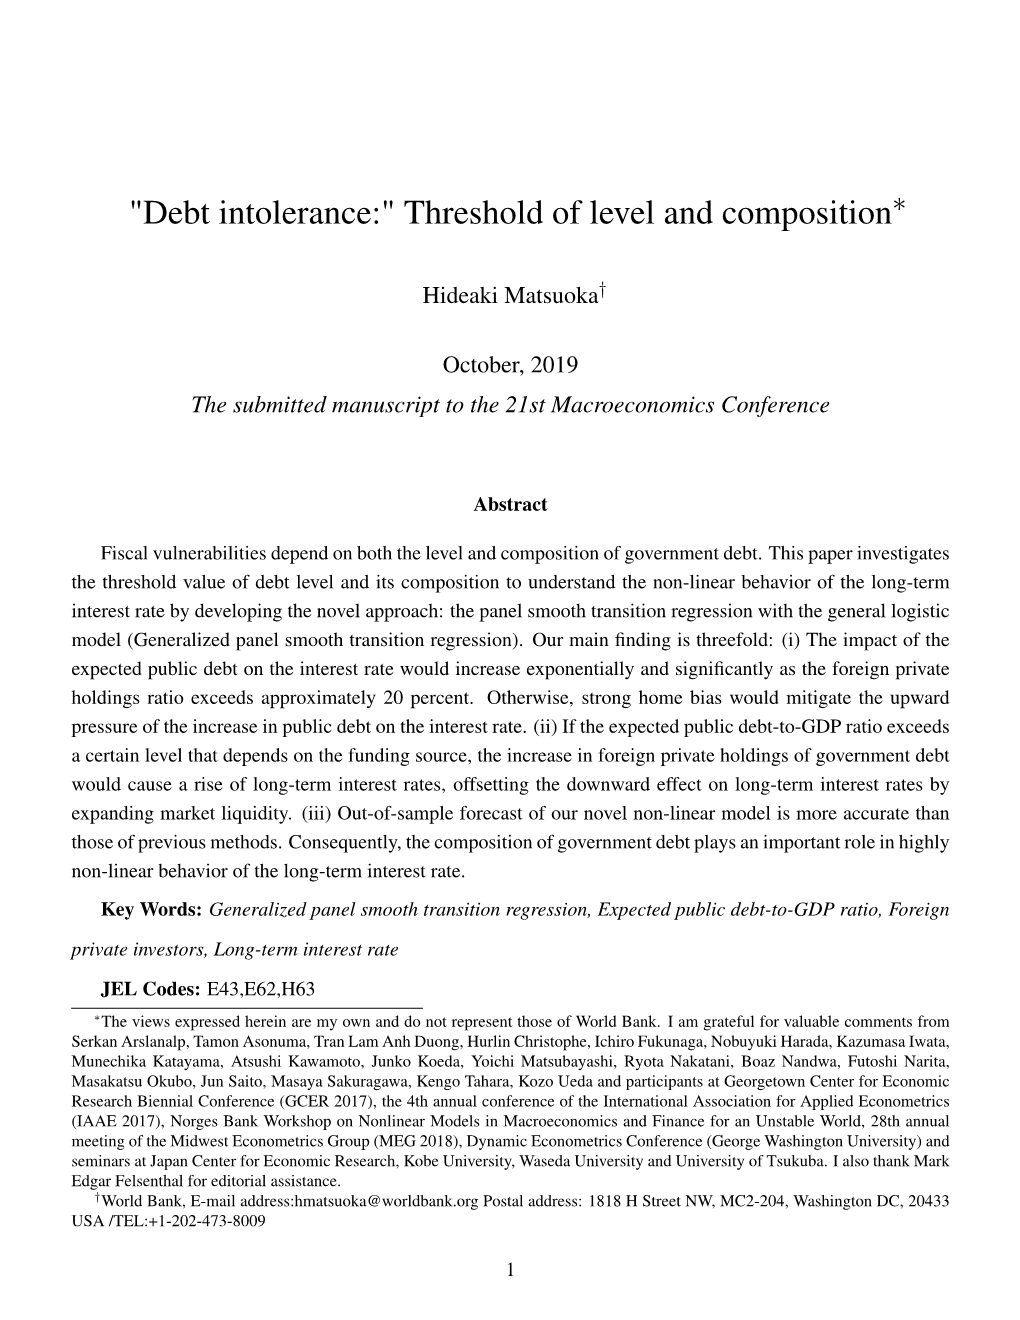 "Debt Intolerance:" Threshold of Level and Composition∗